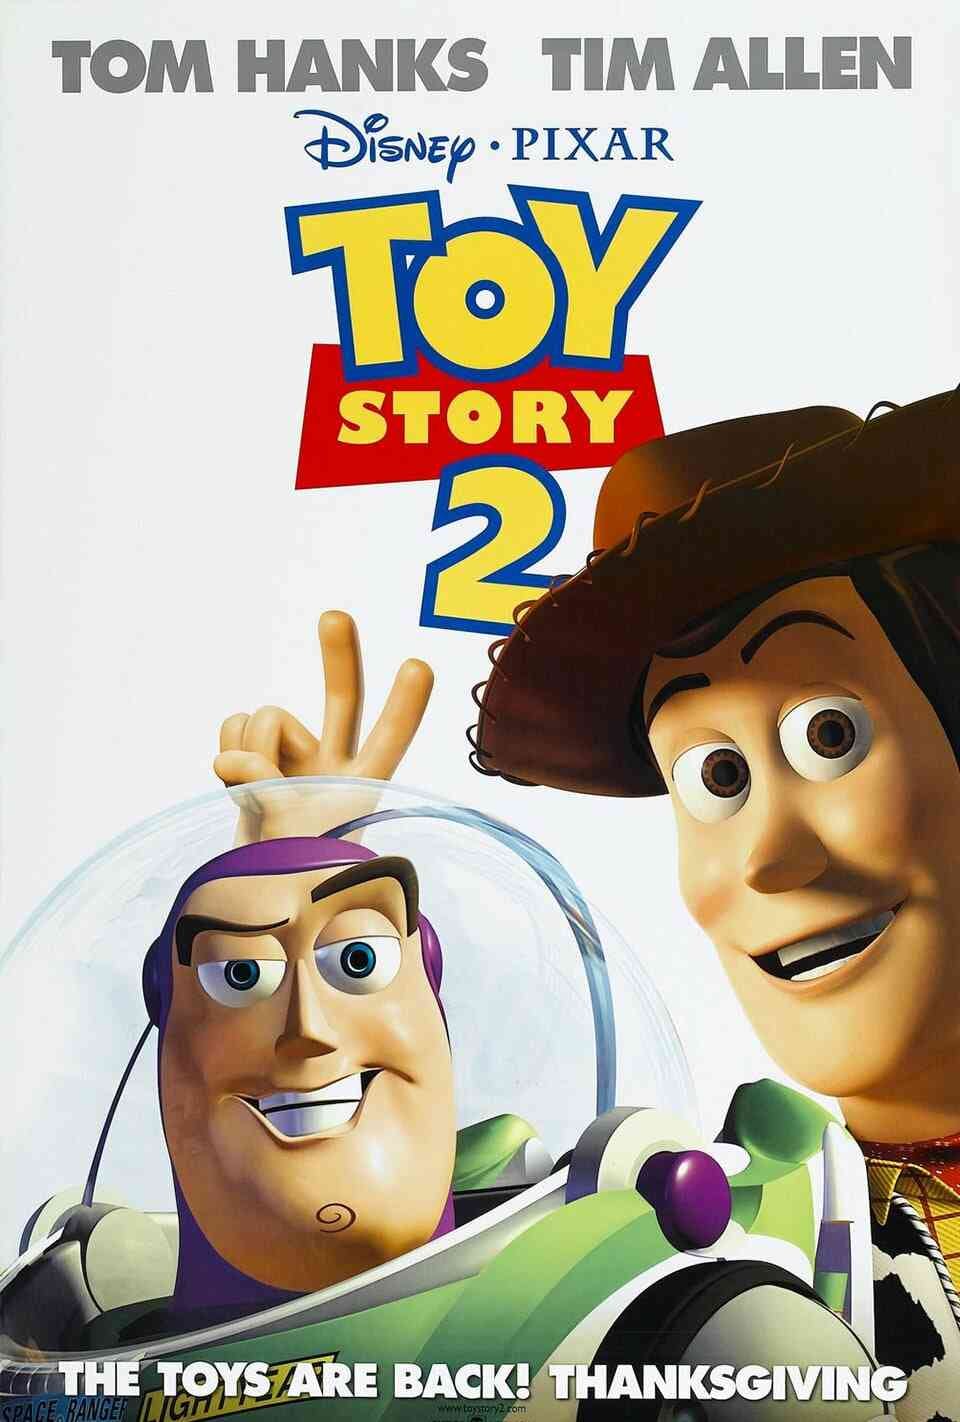 Read Toy Story 2 screenplay (poster)